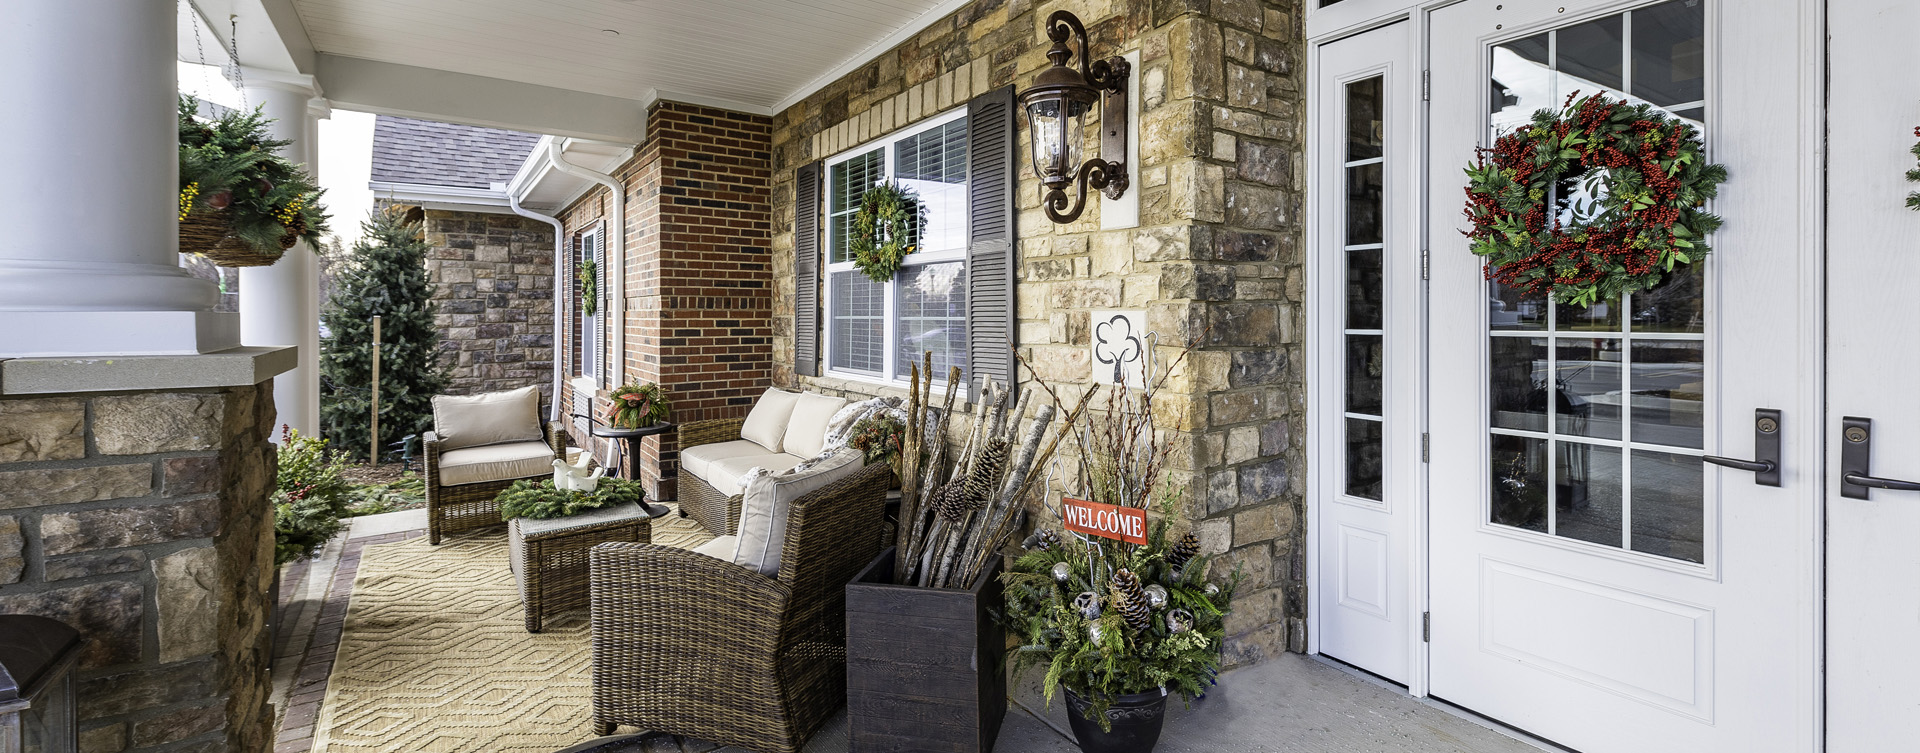 Relax in your favorite chair on the porch at Bickford of Canton